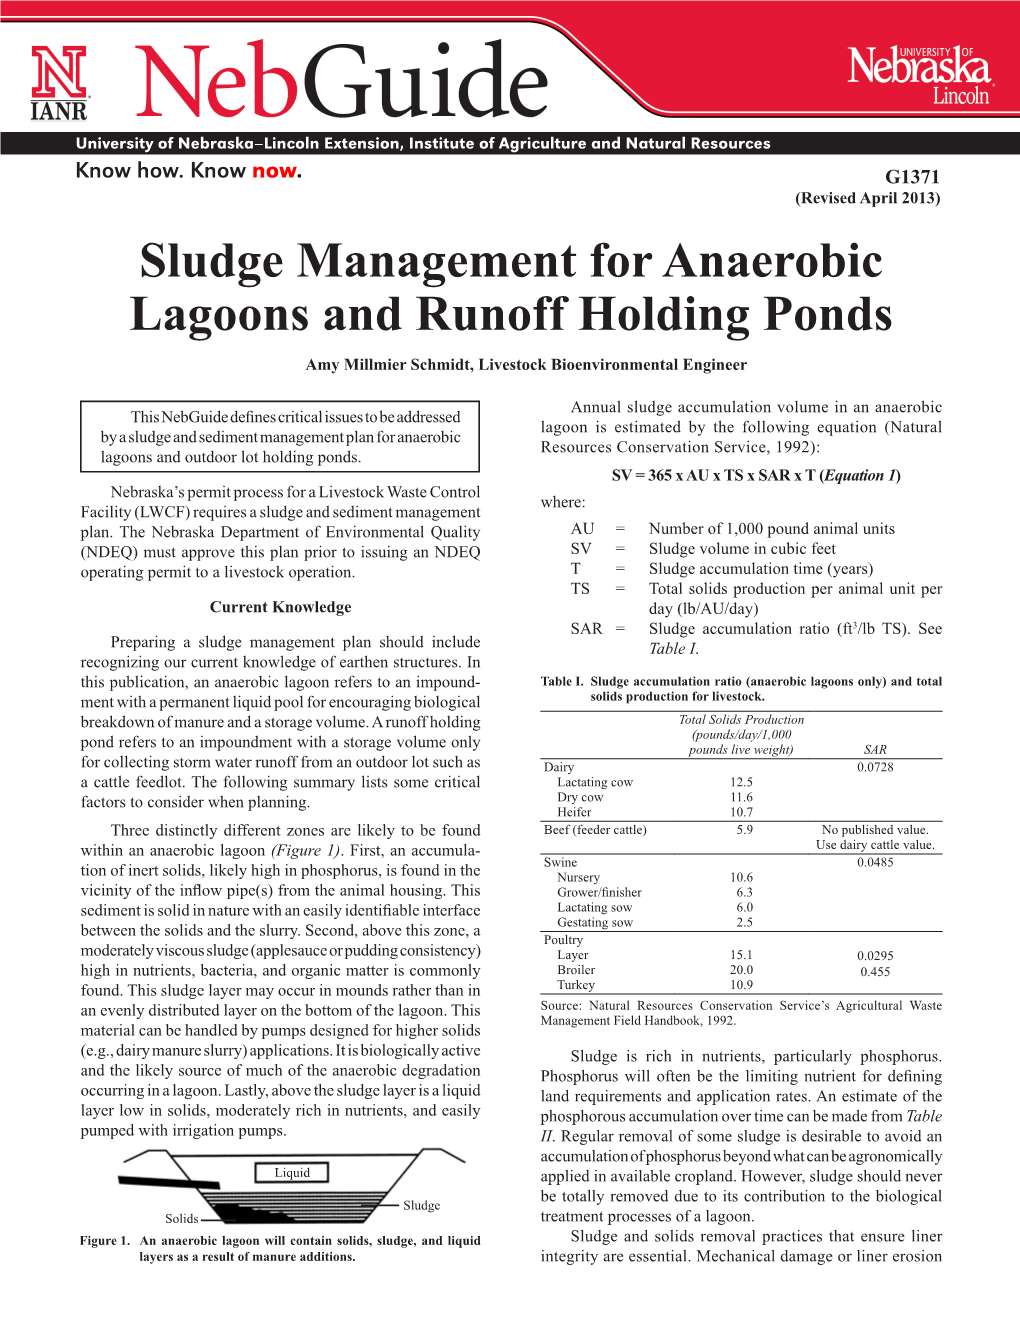 Sludge Management for Anaerobic Lagoons and Runoff Holding Ponds Amy Millmier Schmidt, Livestock Bioenvironmental Engineer